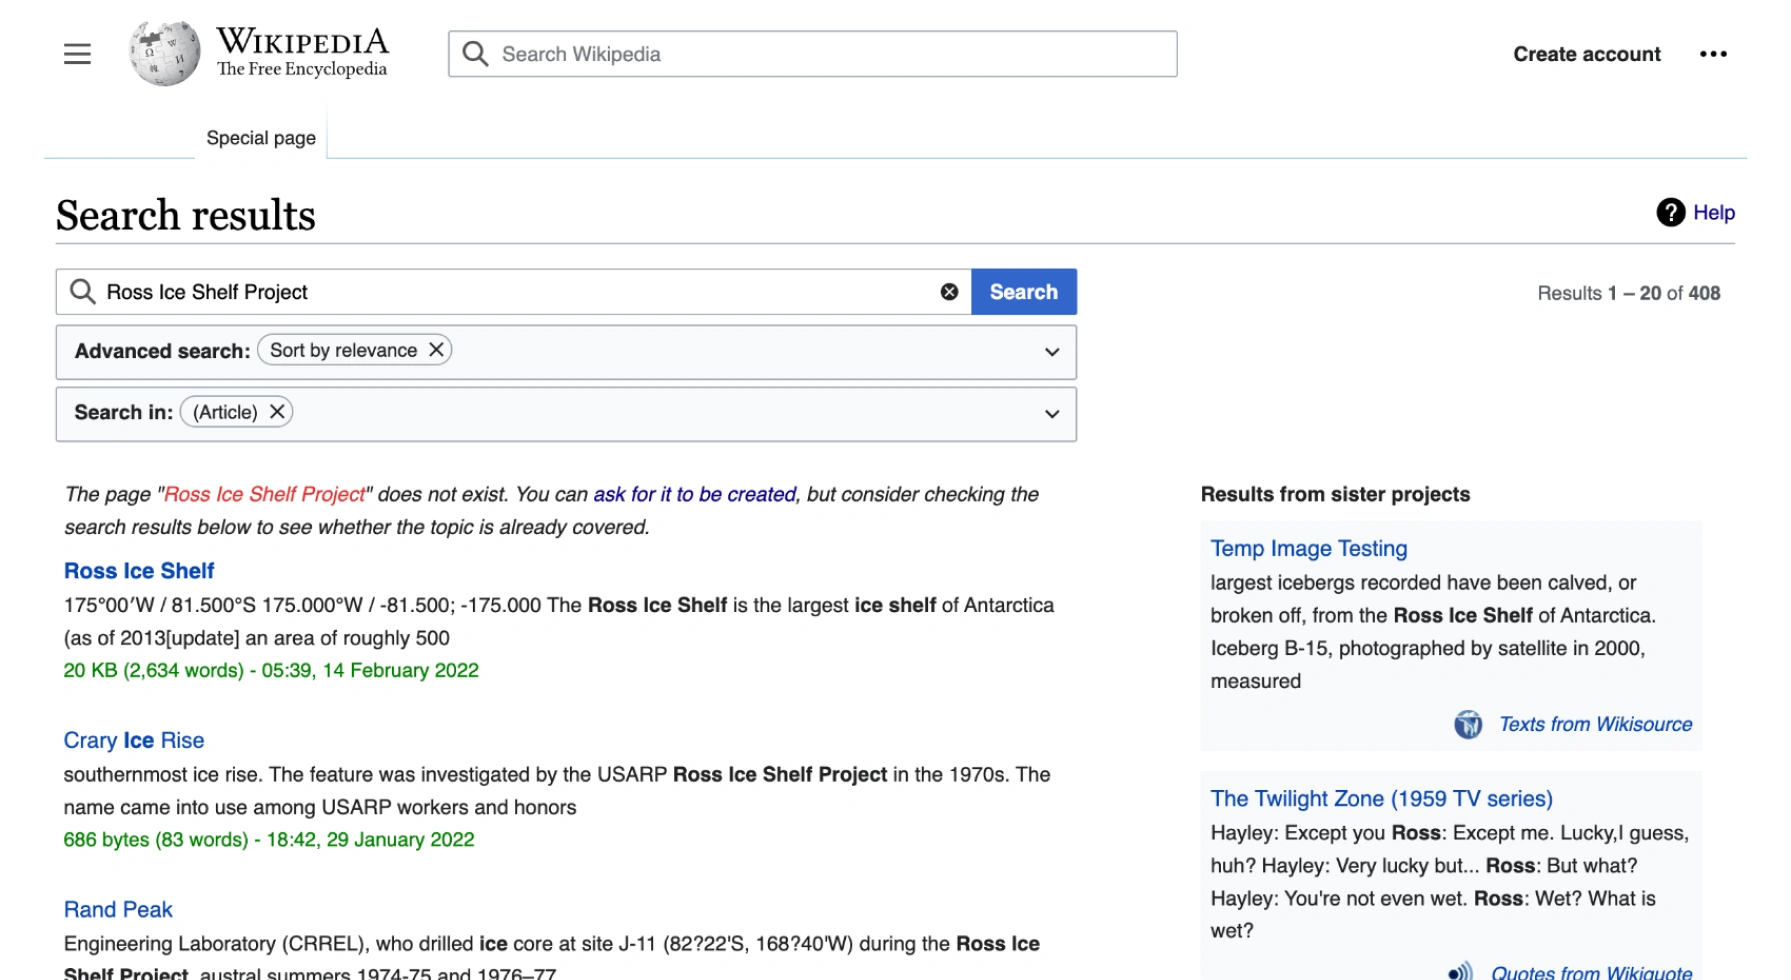 Screenshot of Wikipedia showing search page before redesign